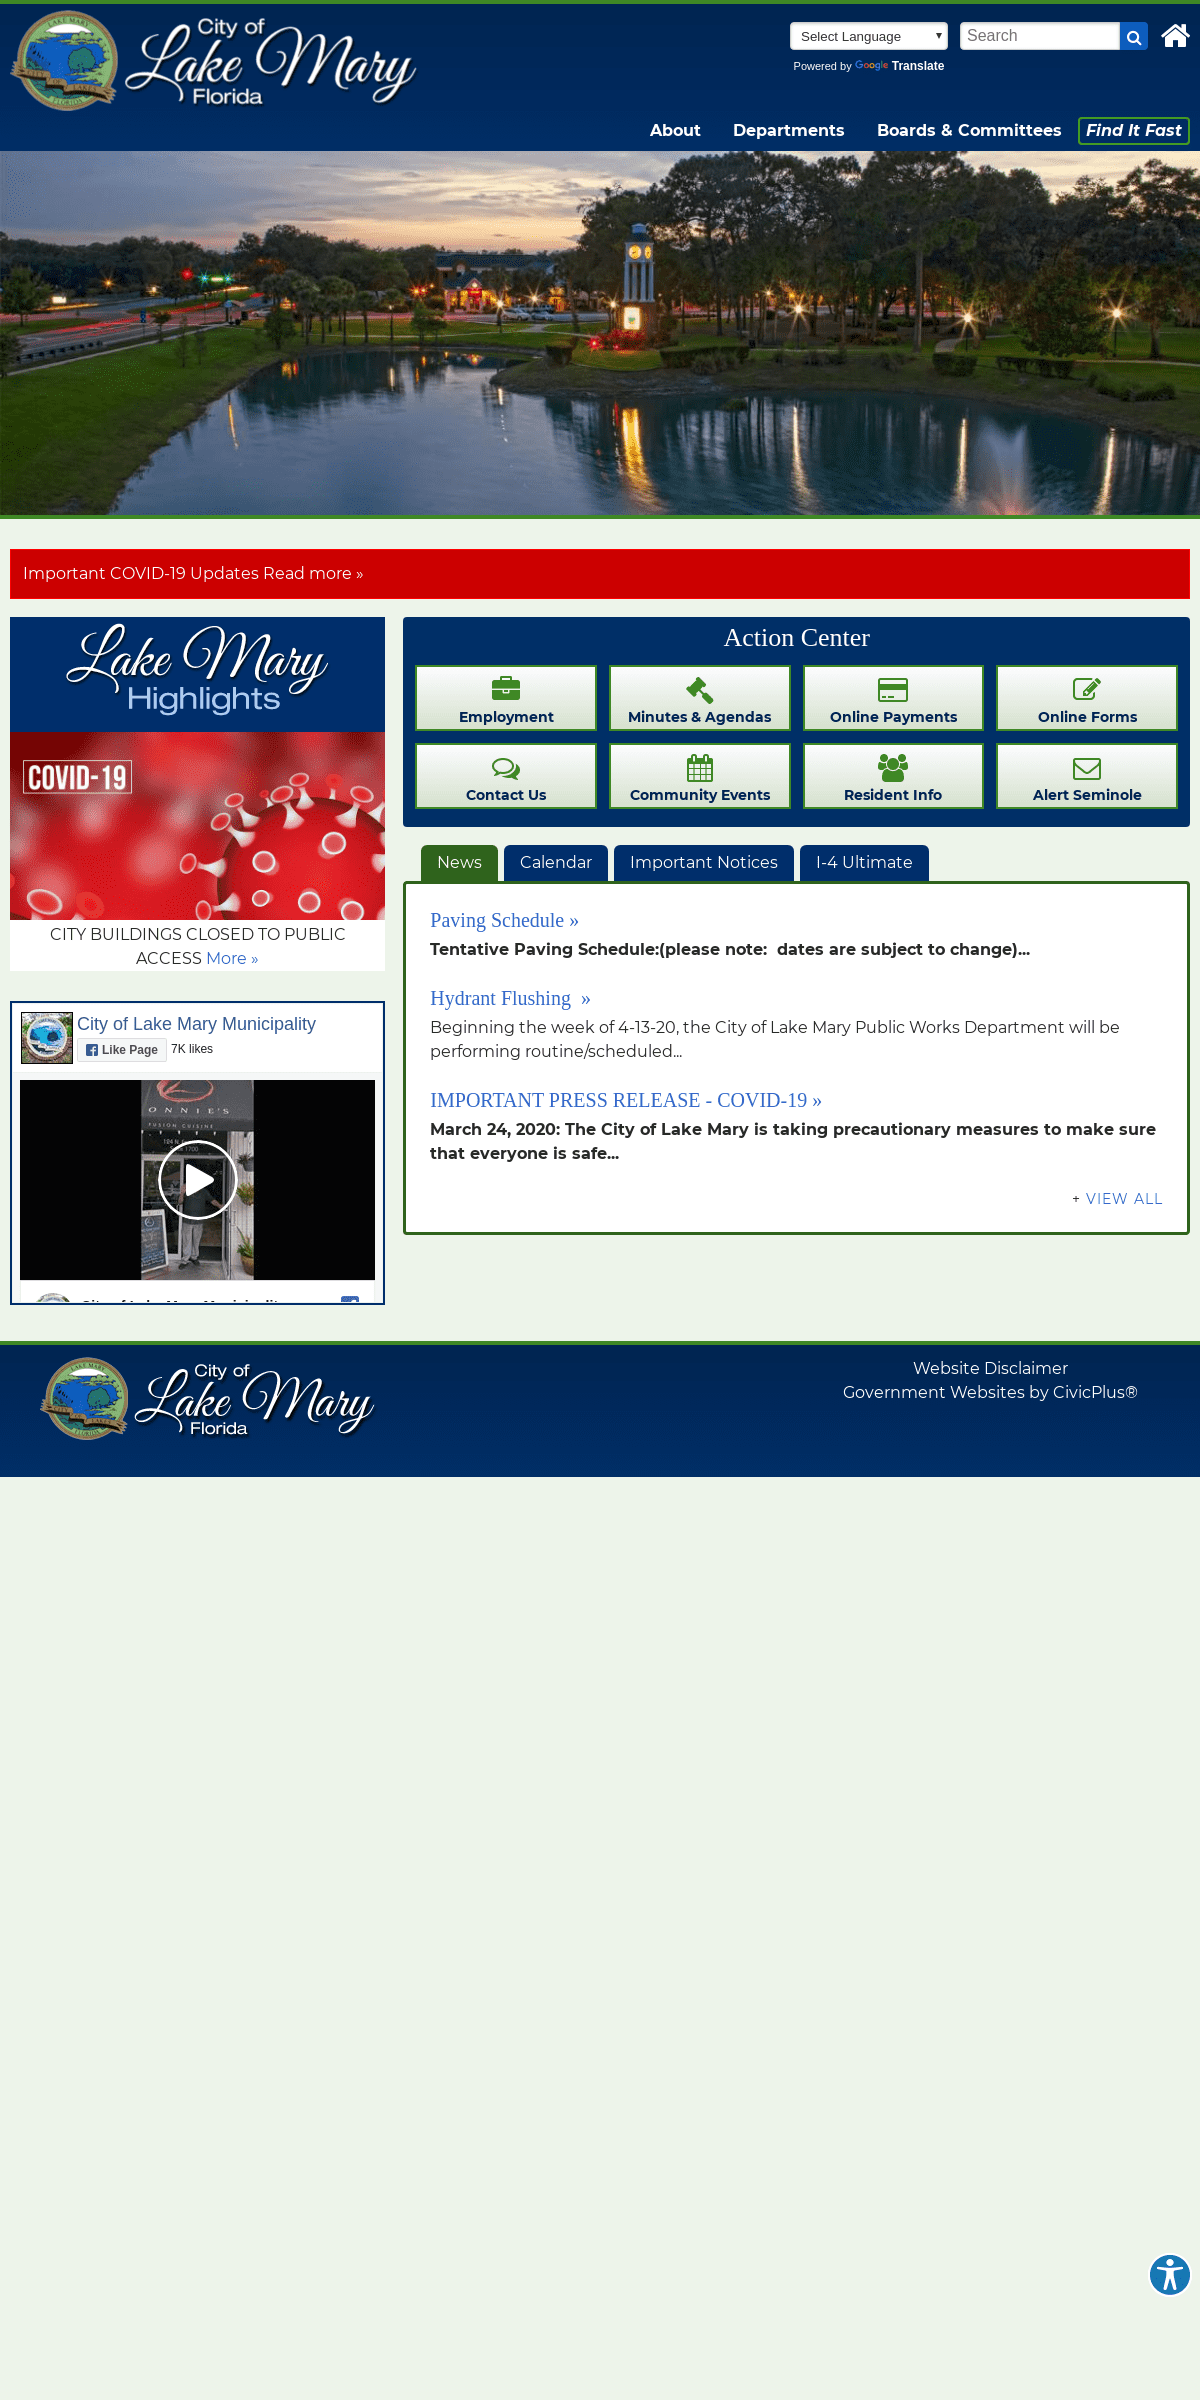 A complete backup of lakemaryfl.com